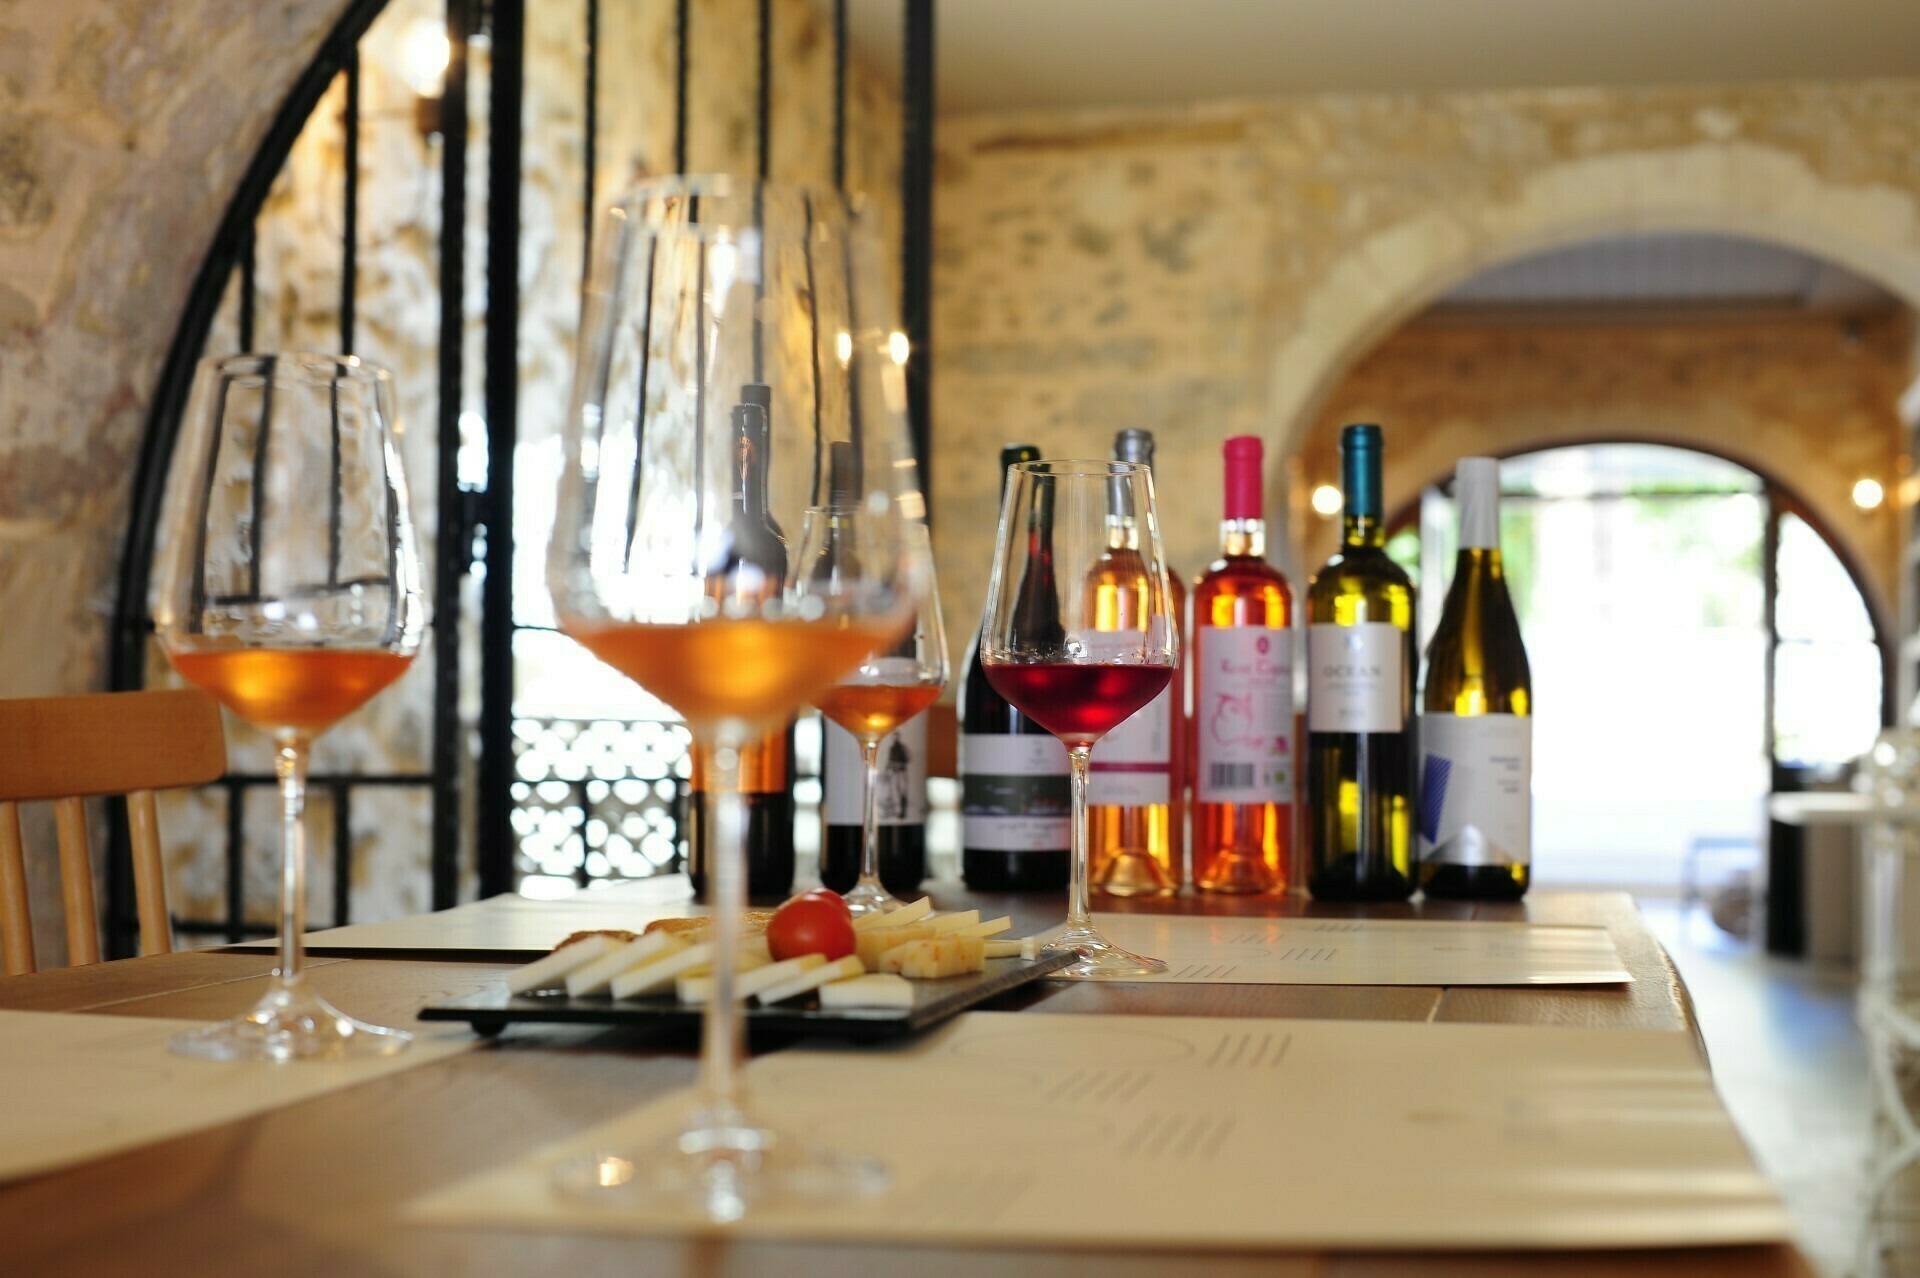 Enjoy the best of Cretan wines with a Rethymno wine tasting session at Pepi Boutique Hotel